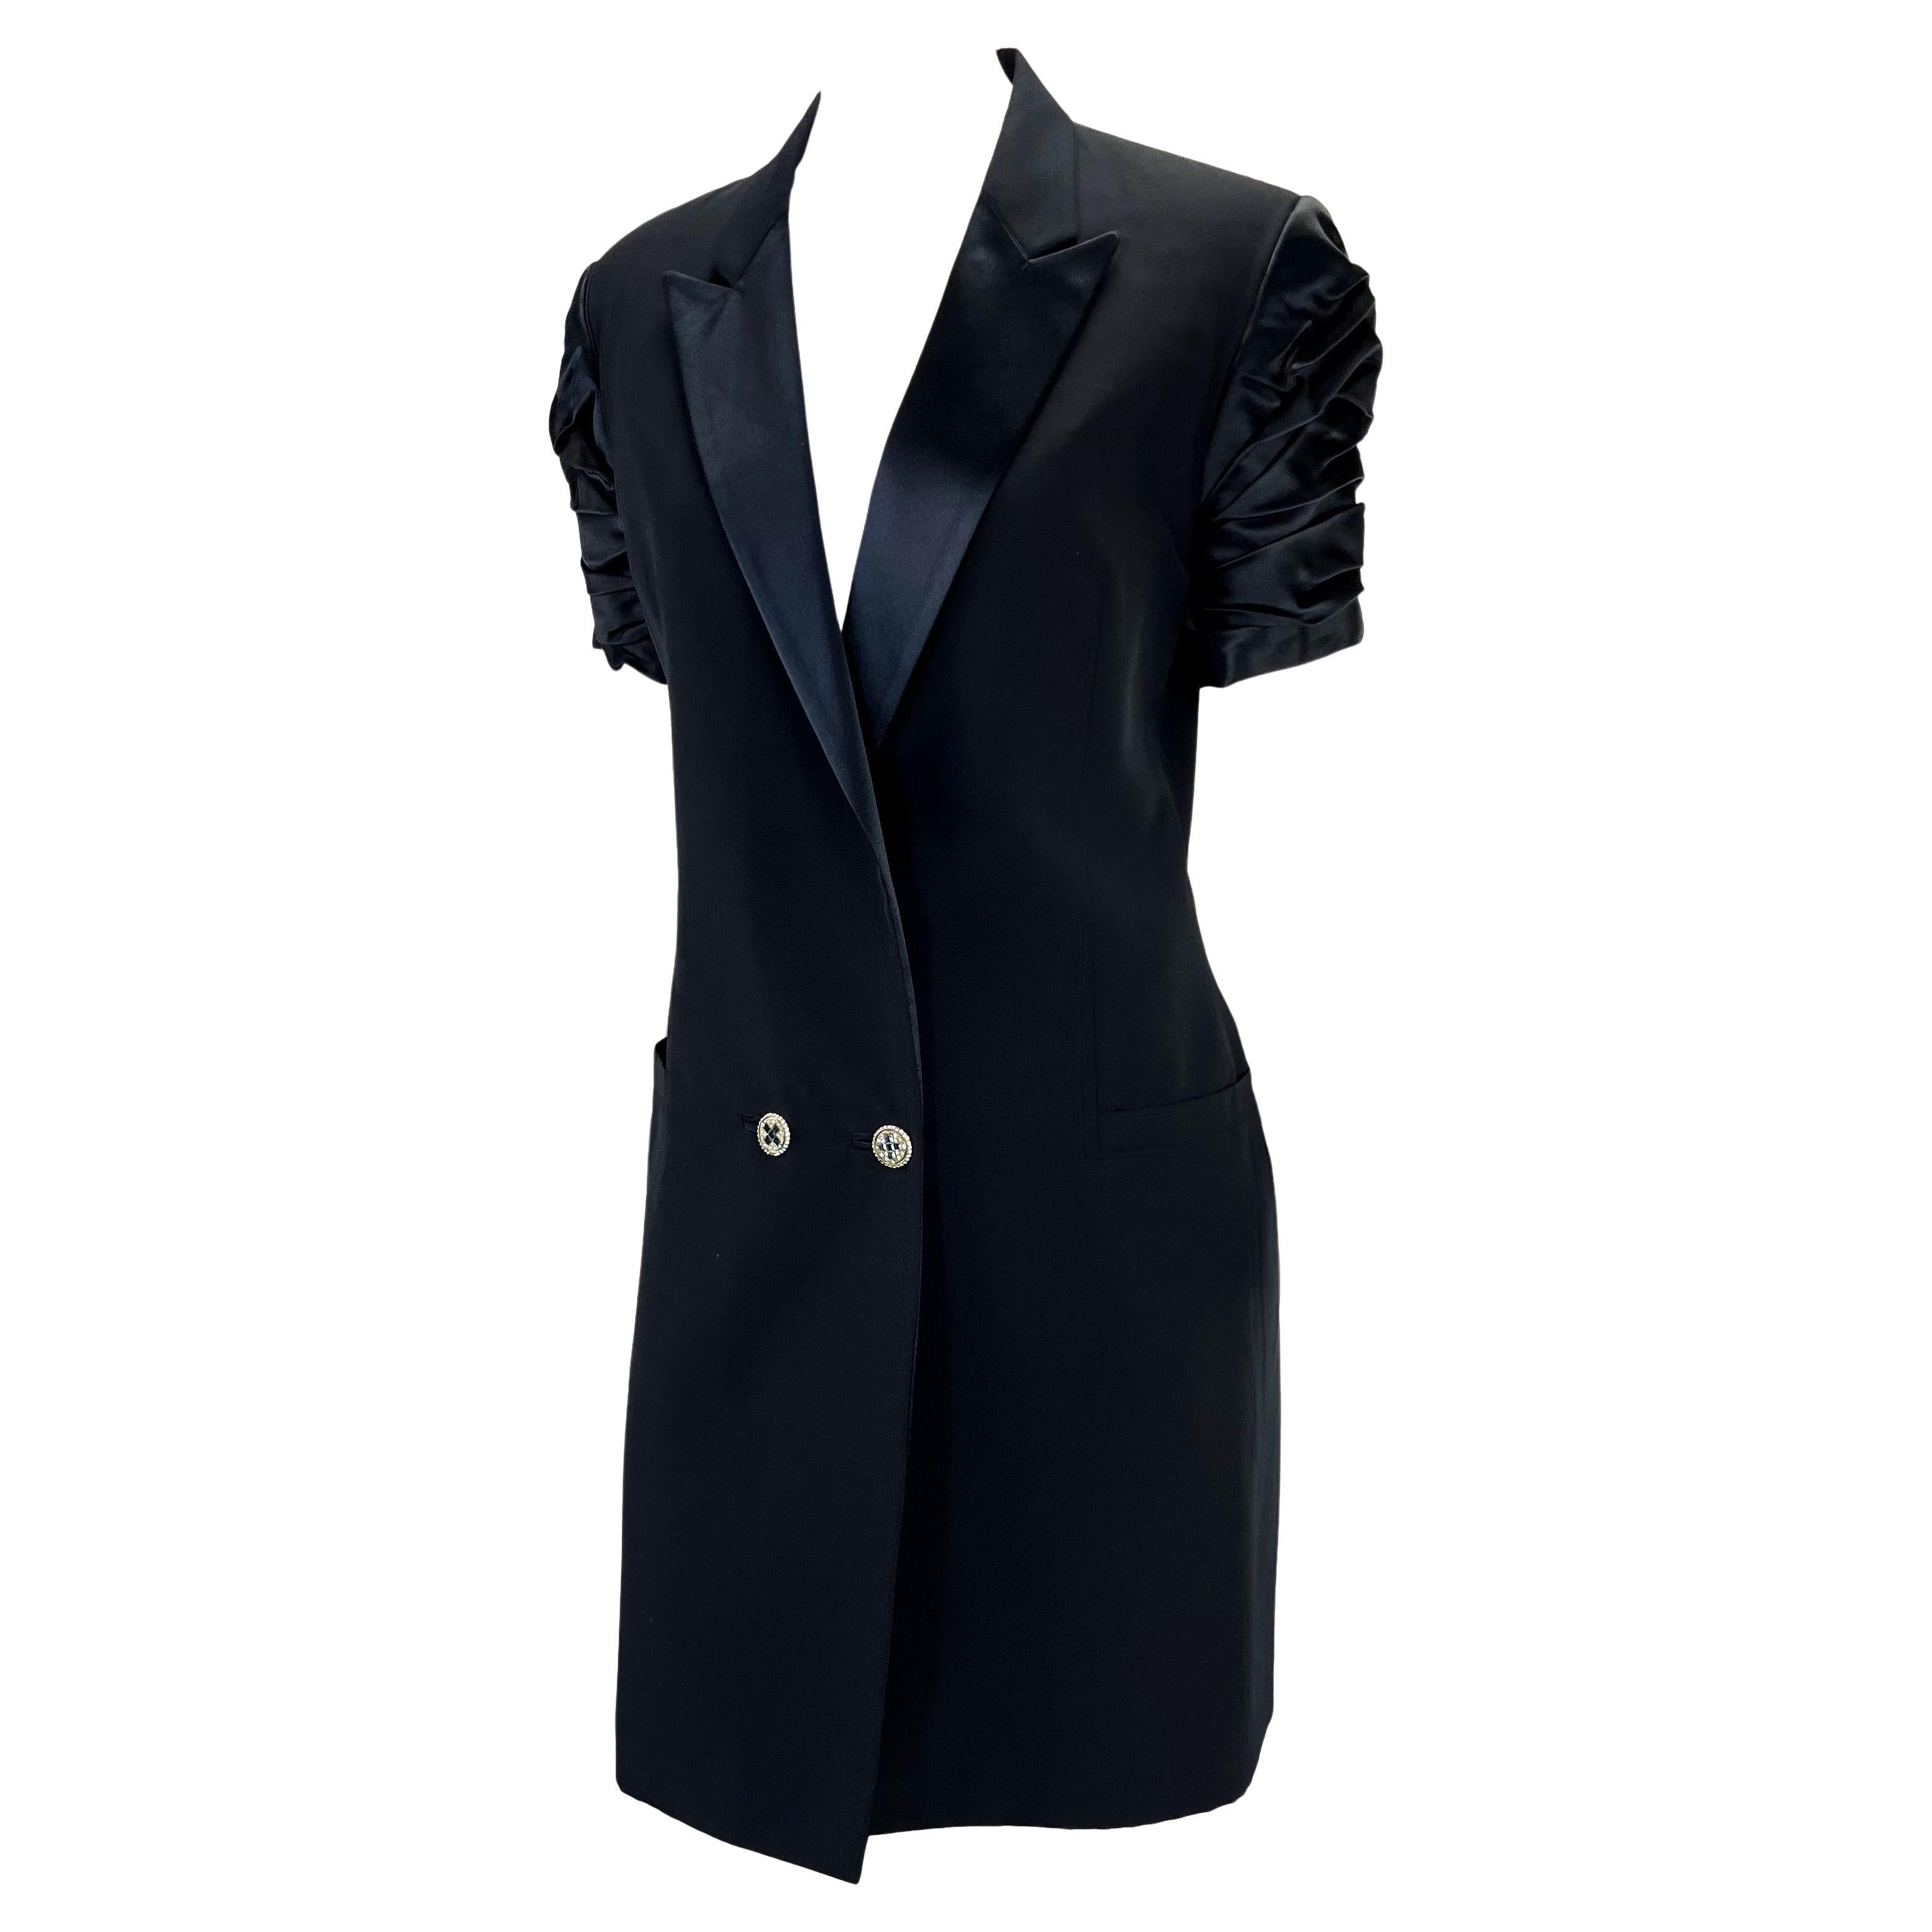 Presenting an incredible navy tuxedo style Gianni Versace Couture dress, designed by Gianni Versace. From the Spring/Summer 1990 collection, this fabulous dress features a plunging v-neckline, ruched satin short sleeves, pockets at the hips, and a